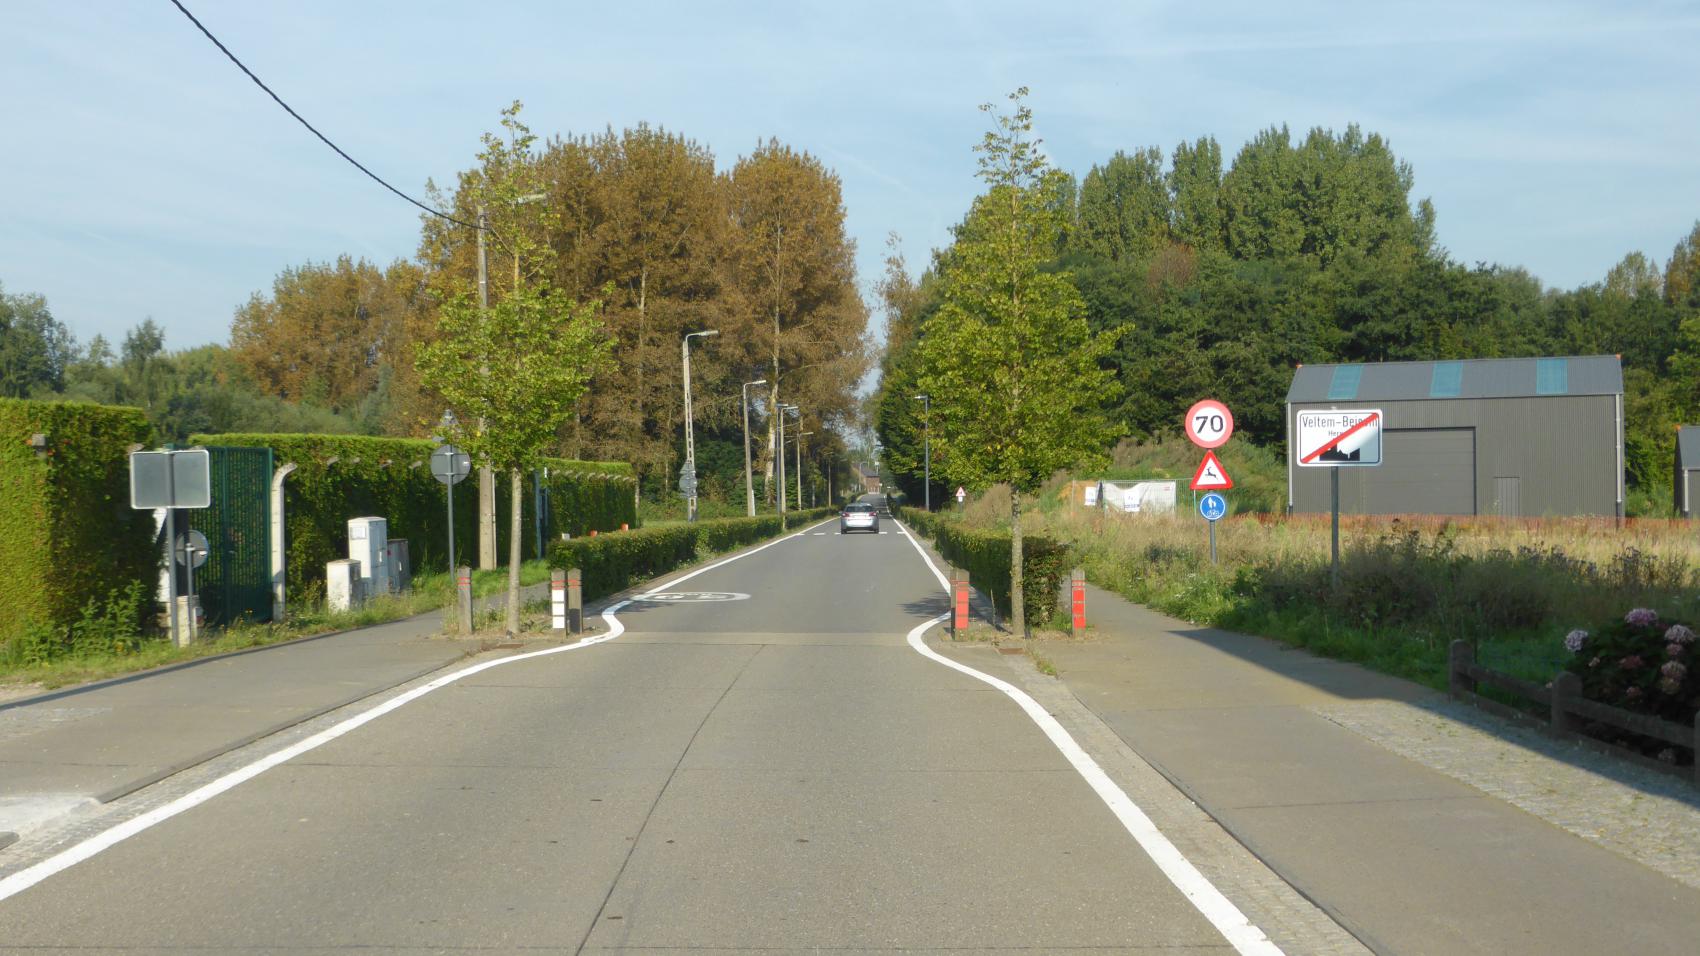 As the road leaves the village, speed limit is raised to 70 km/h and higher degree of separation between cyclists and motorised vehicles is justified – therefore the hedges between the cycle paths and the carriageway.